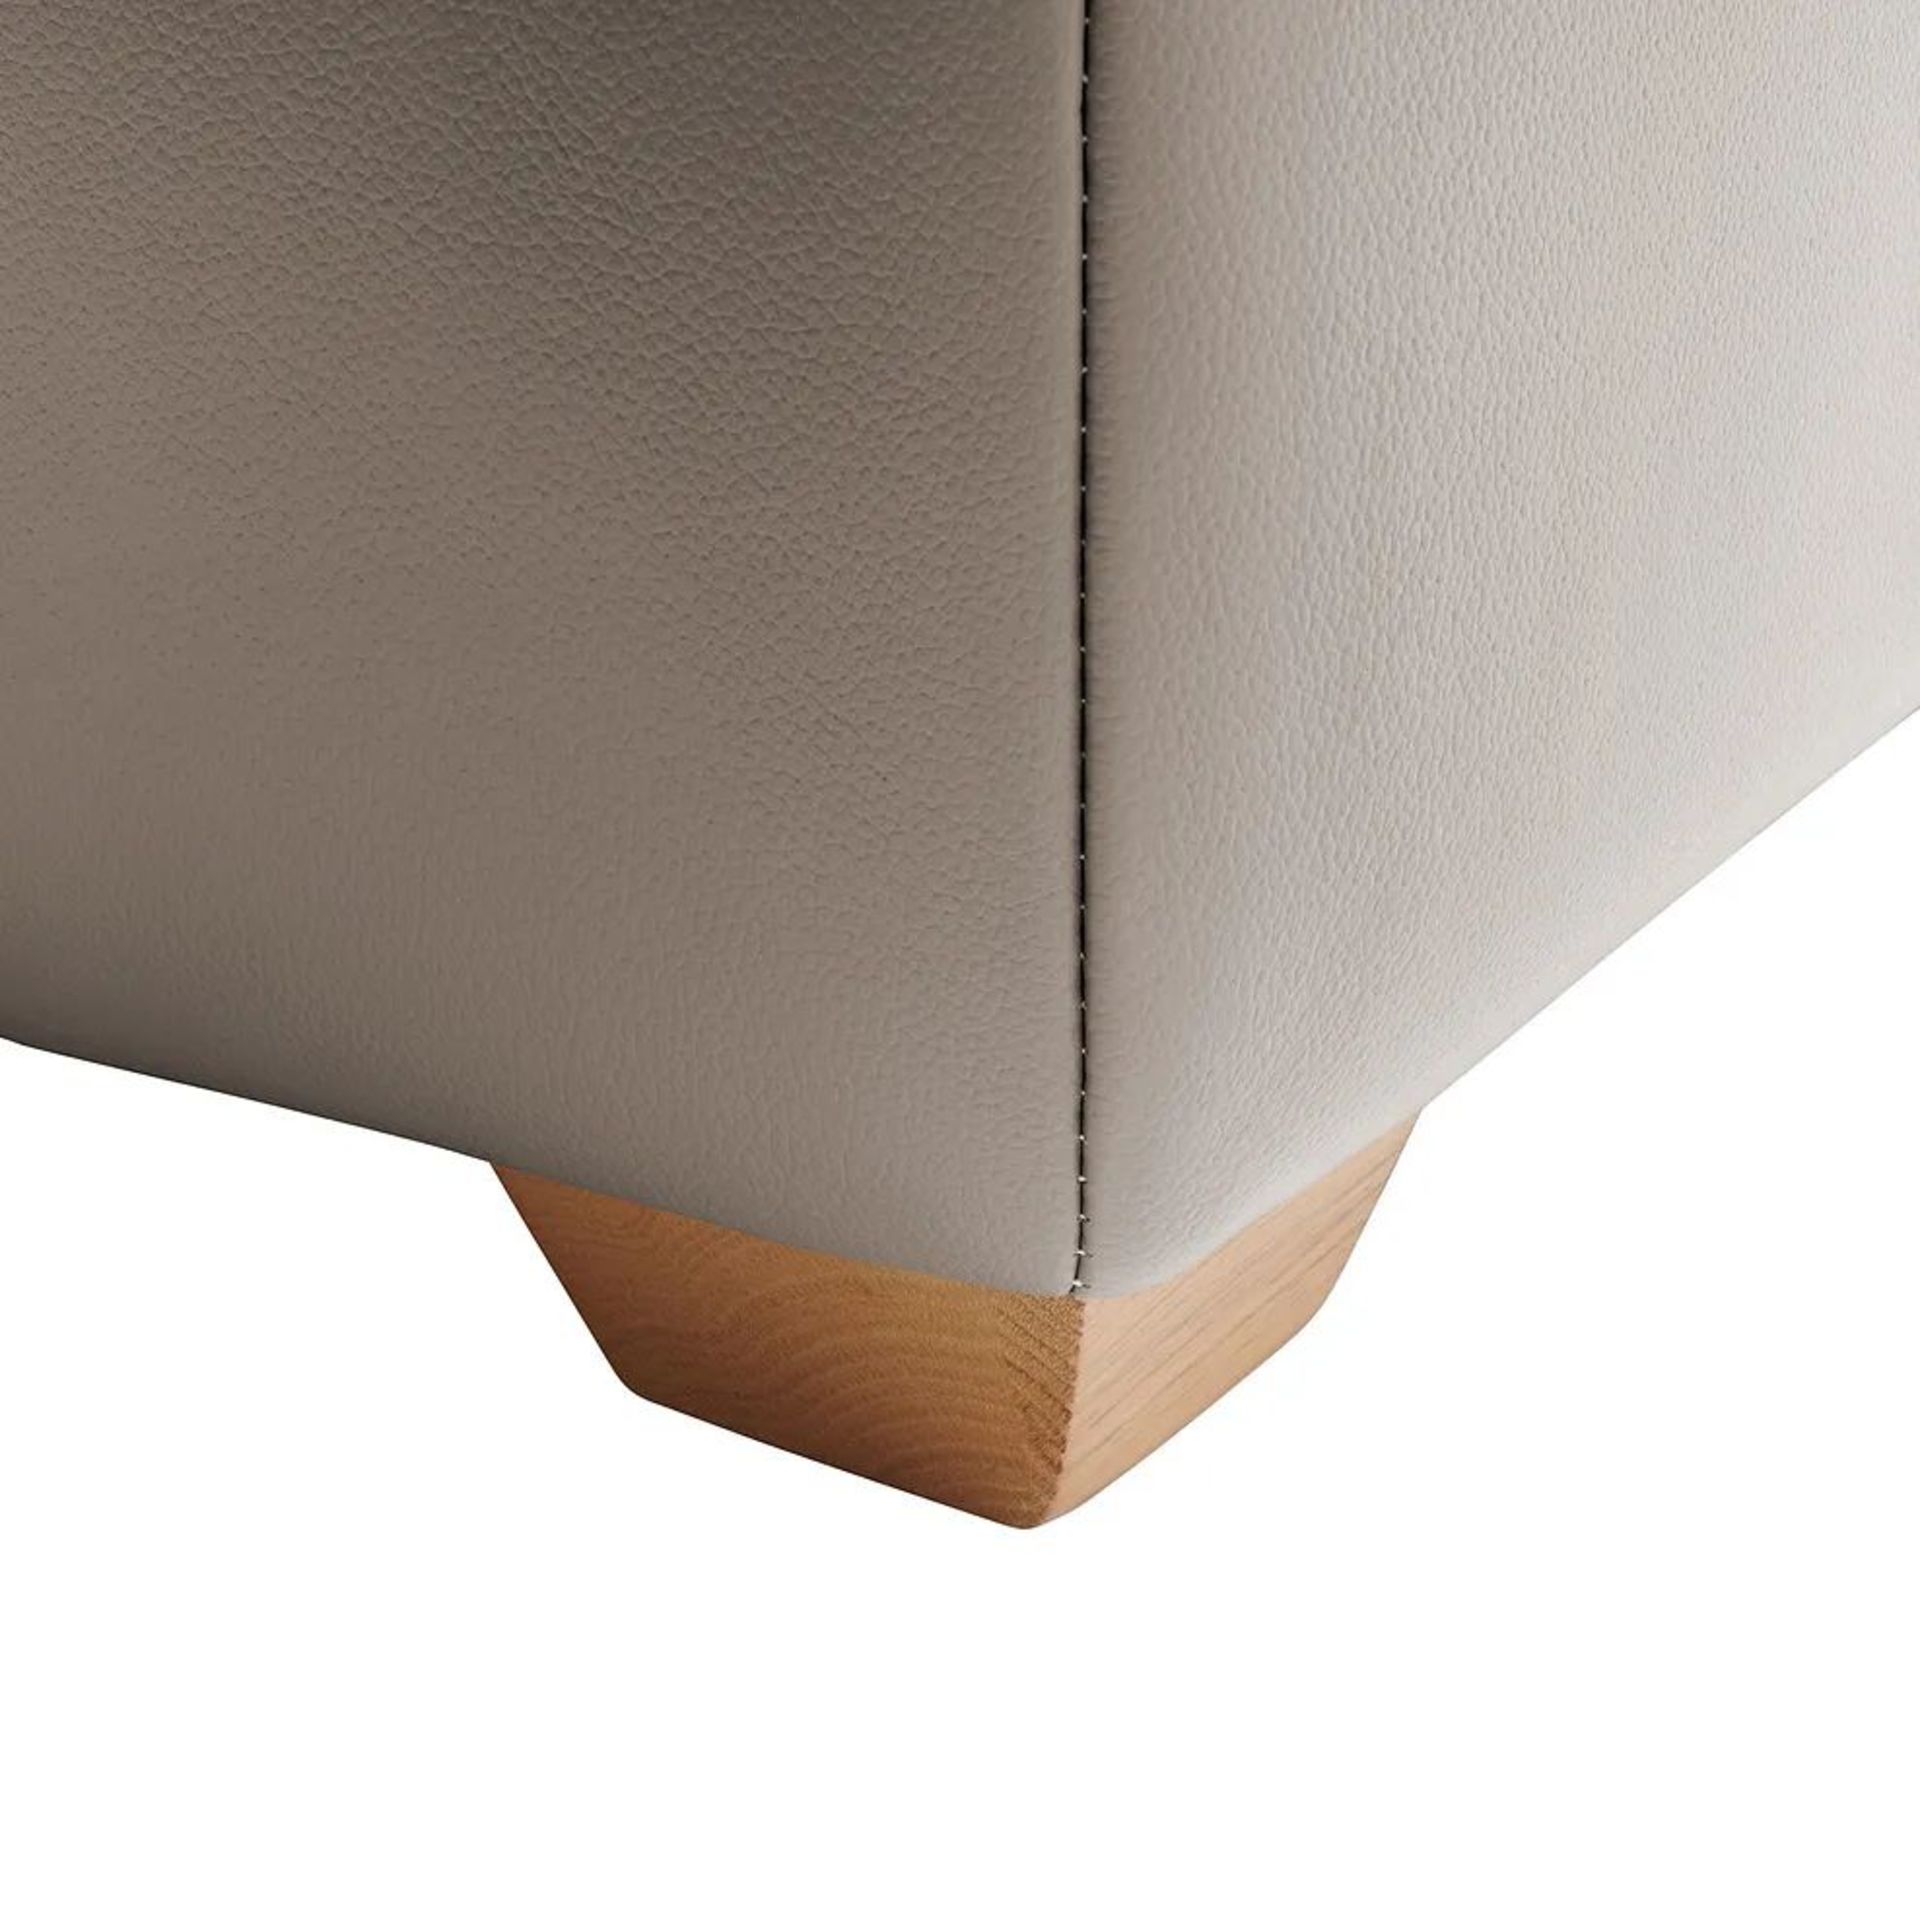 BRAND NEW SAMSON Storage Footstool - STONE LEATHER. RRP £349. Characterised by a simple cuboid - Image 5 of 7